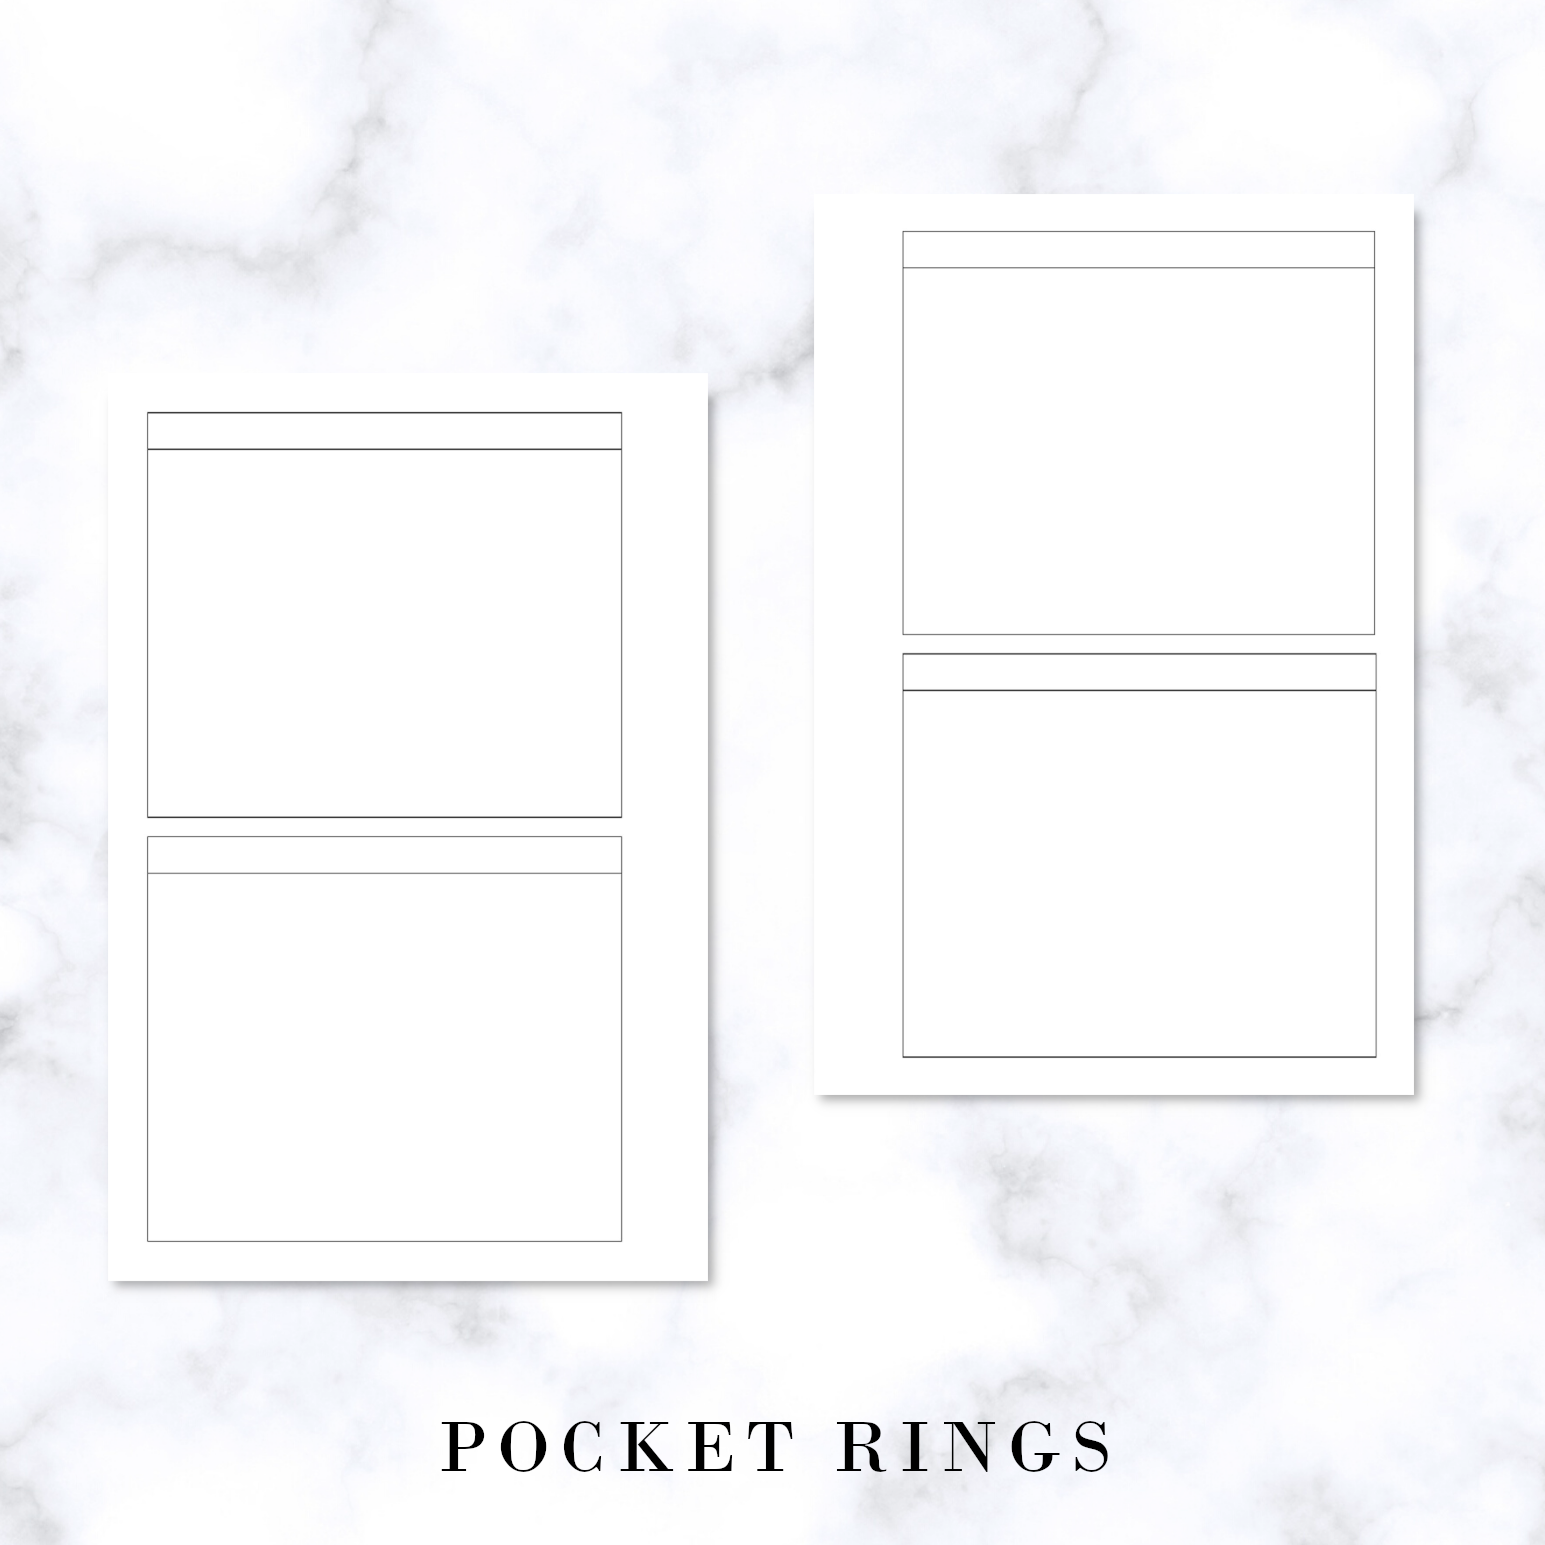 Pocket Rings: Two Horizontal Boxes - Blank - Planner Printables